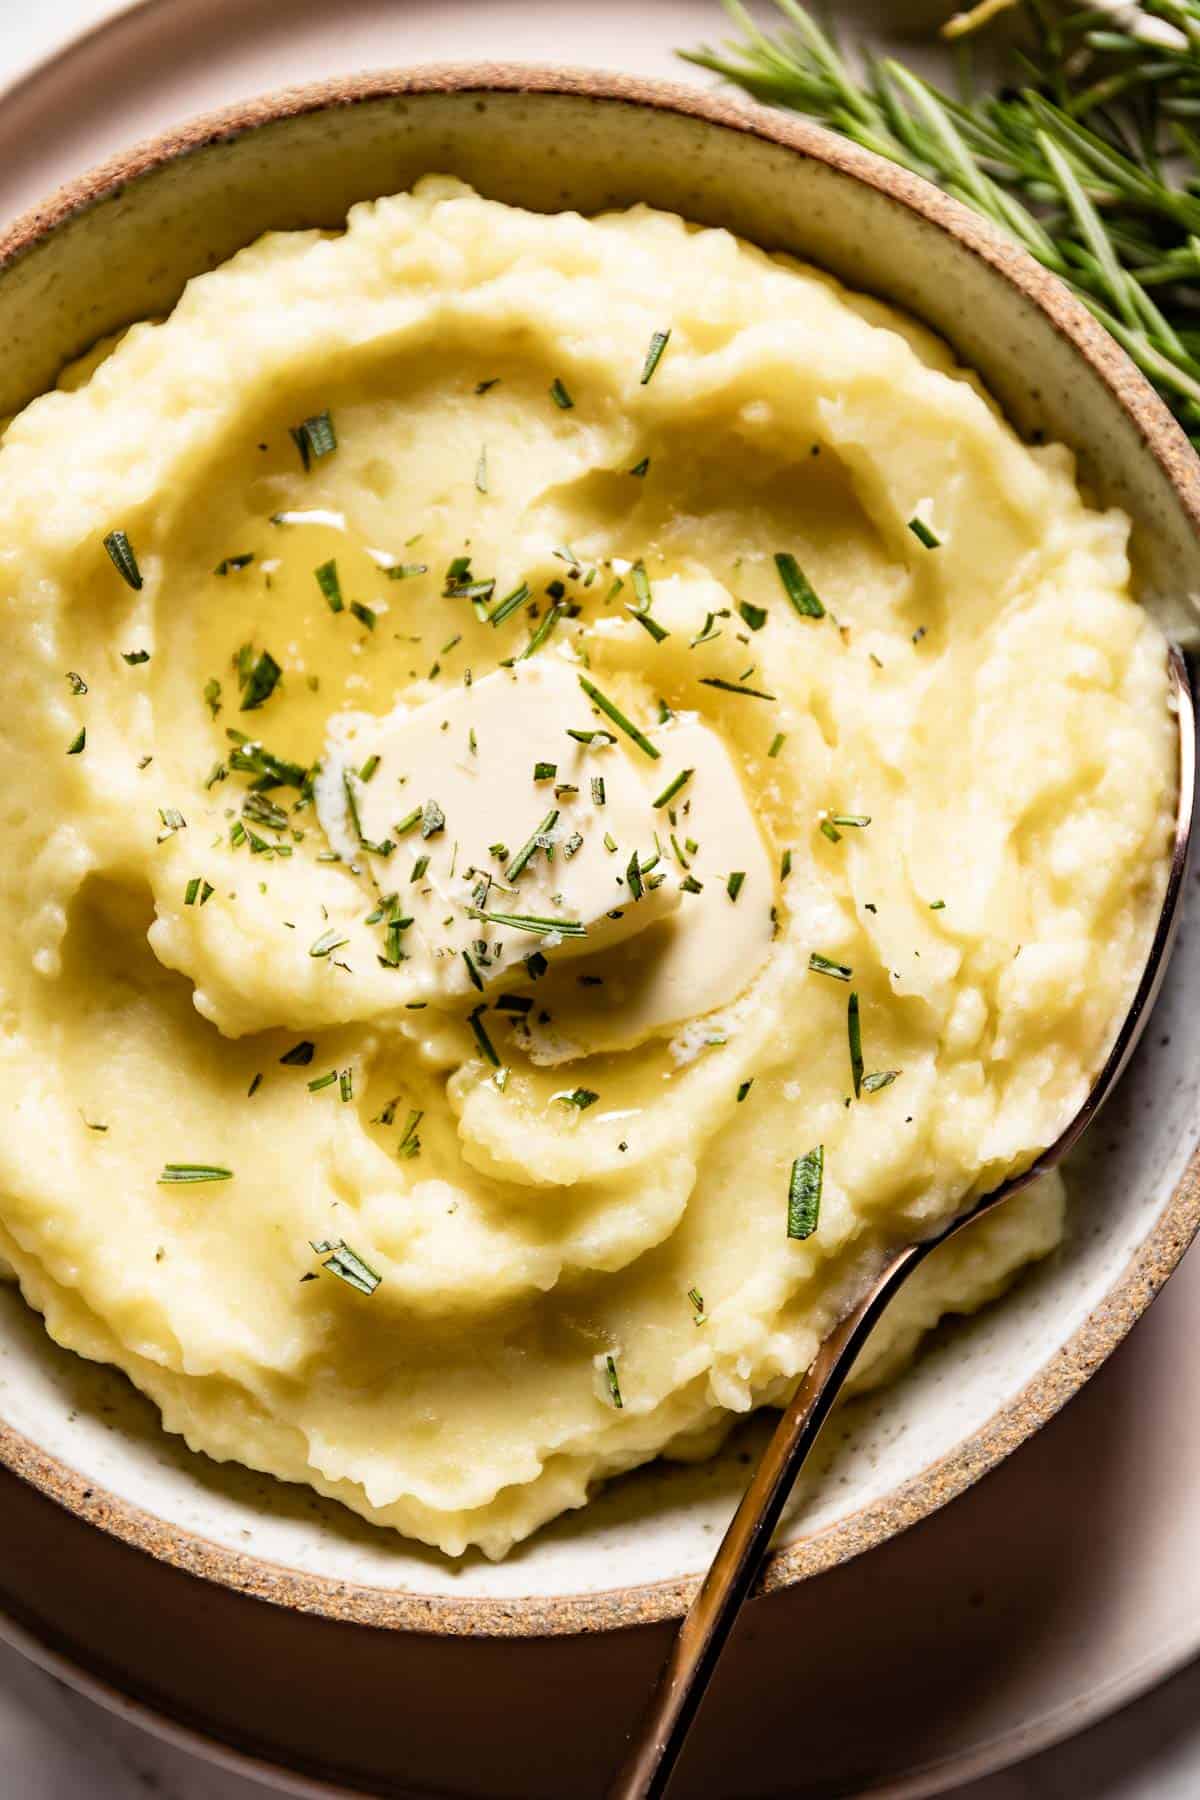 Mashed potatoes with garlic and rosemary in a bowl from the top view.